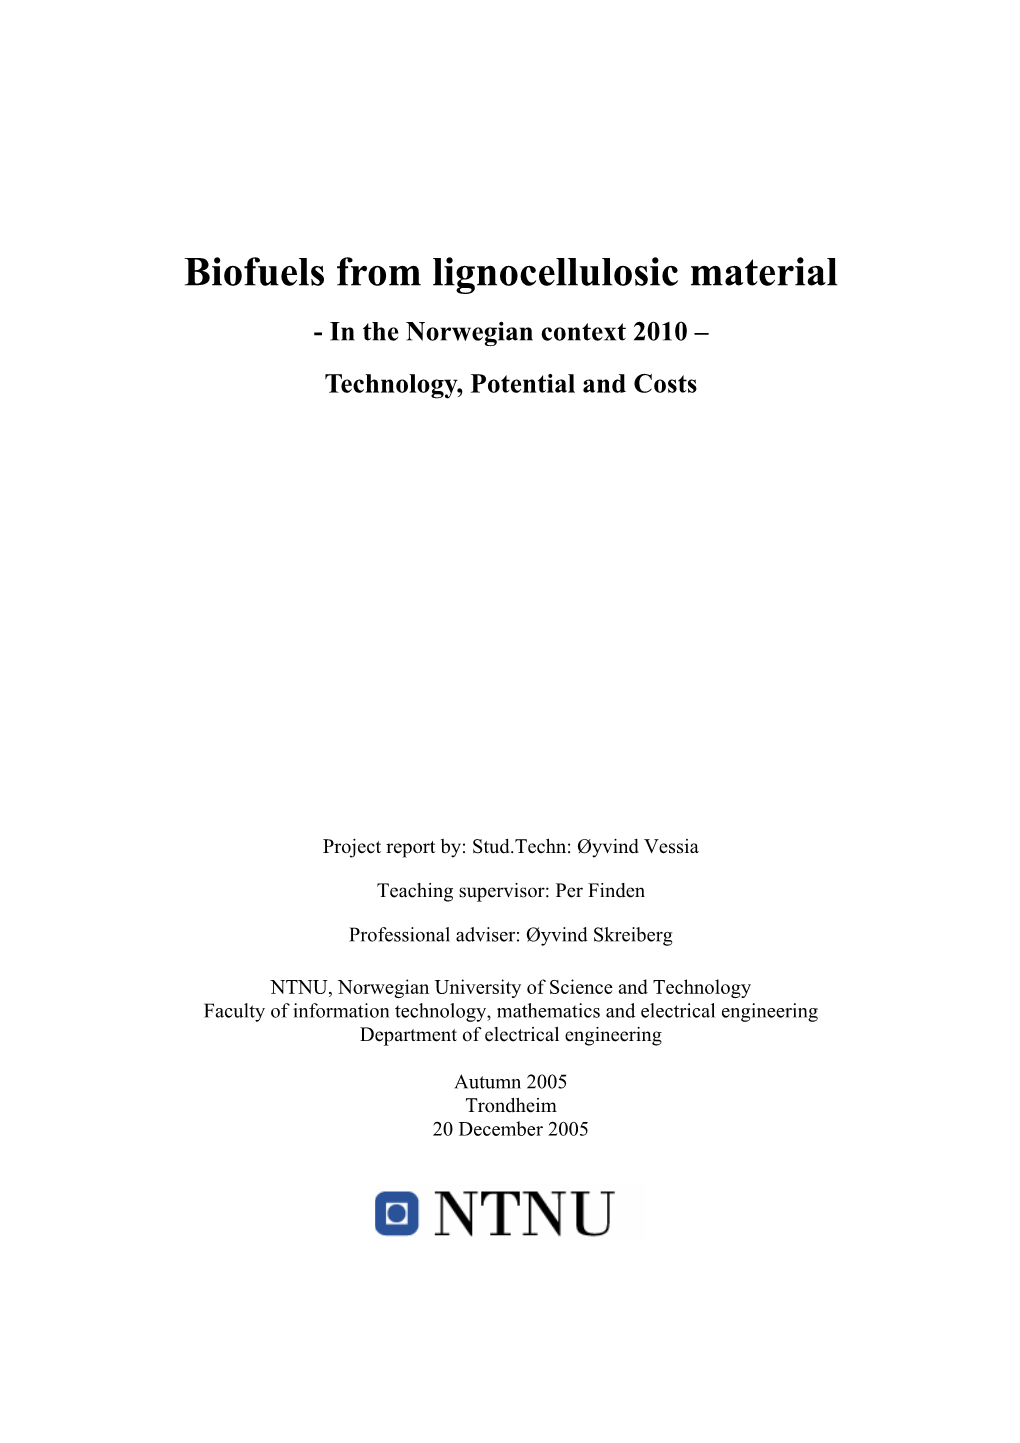 Biofuels from Lignocellulosic Material - in the Norwegian Context 2010 – Technology, Potential and Costs